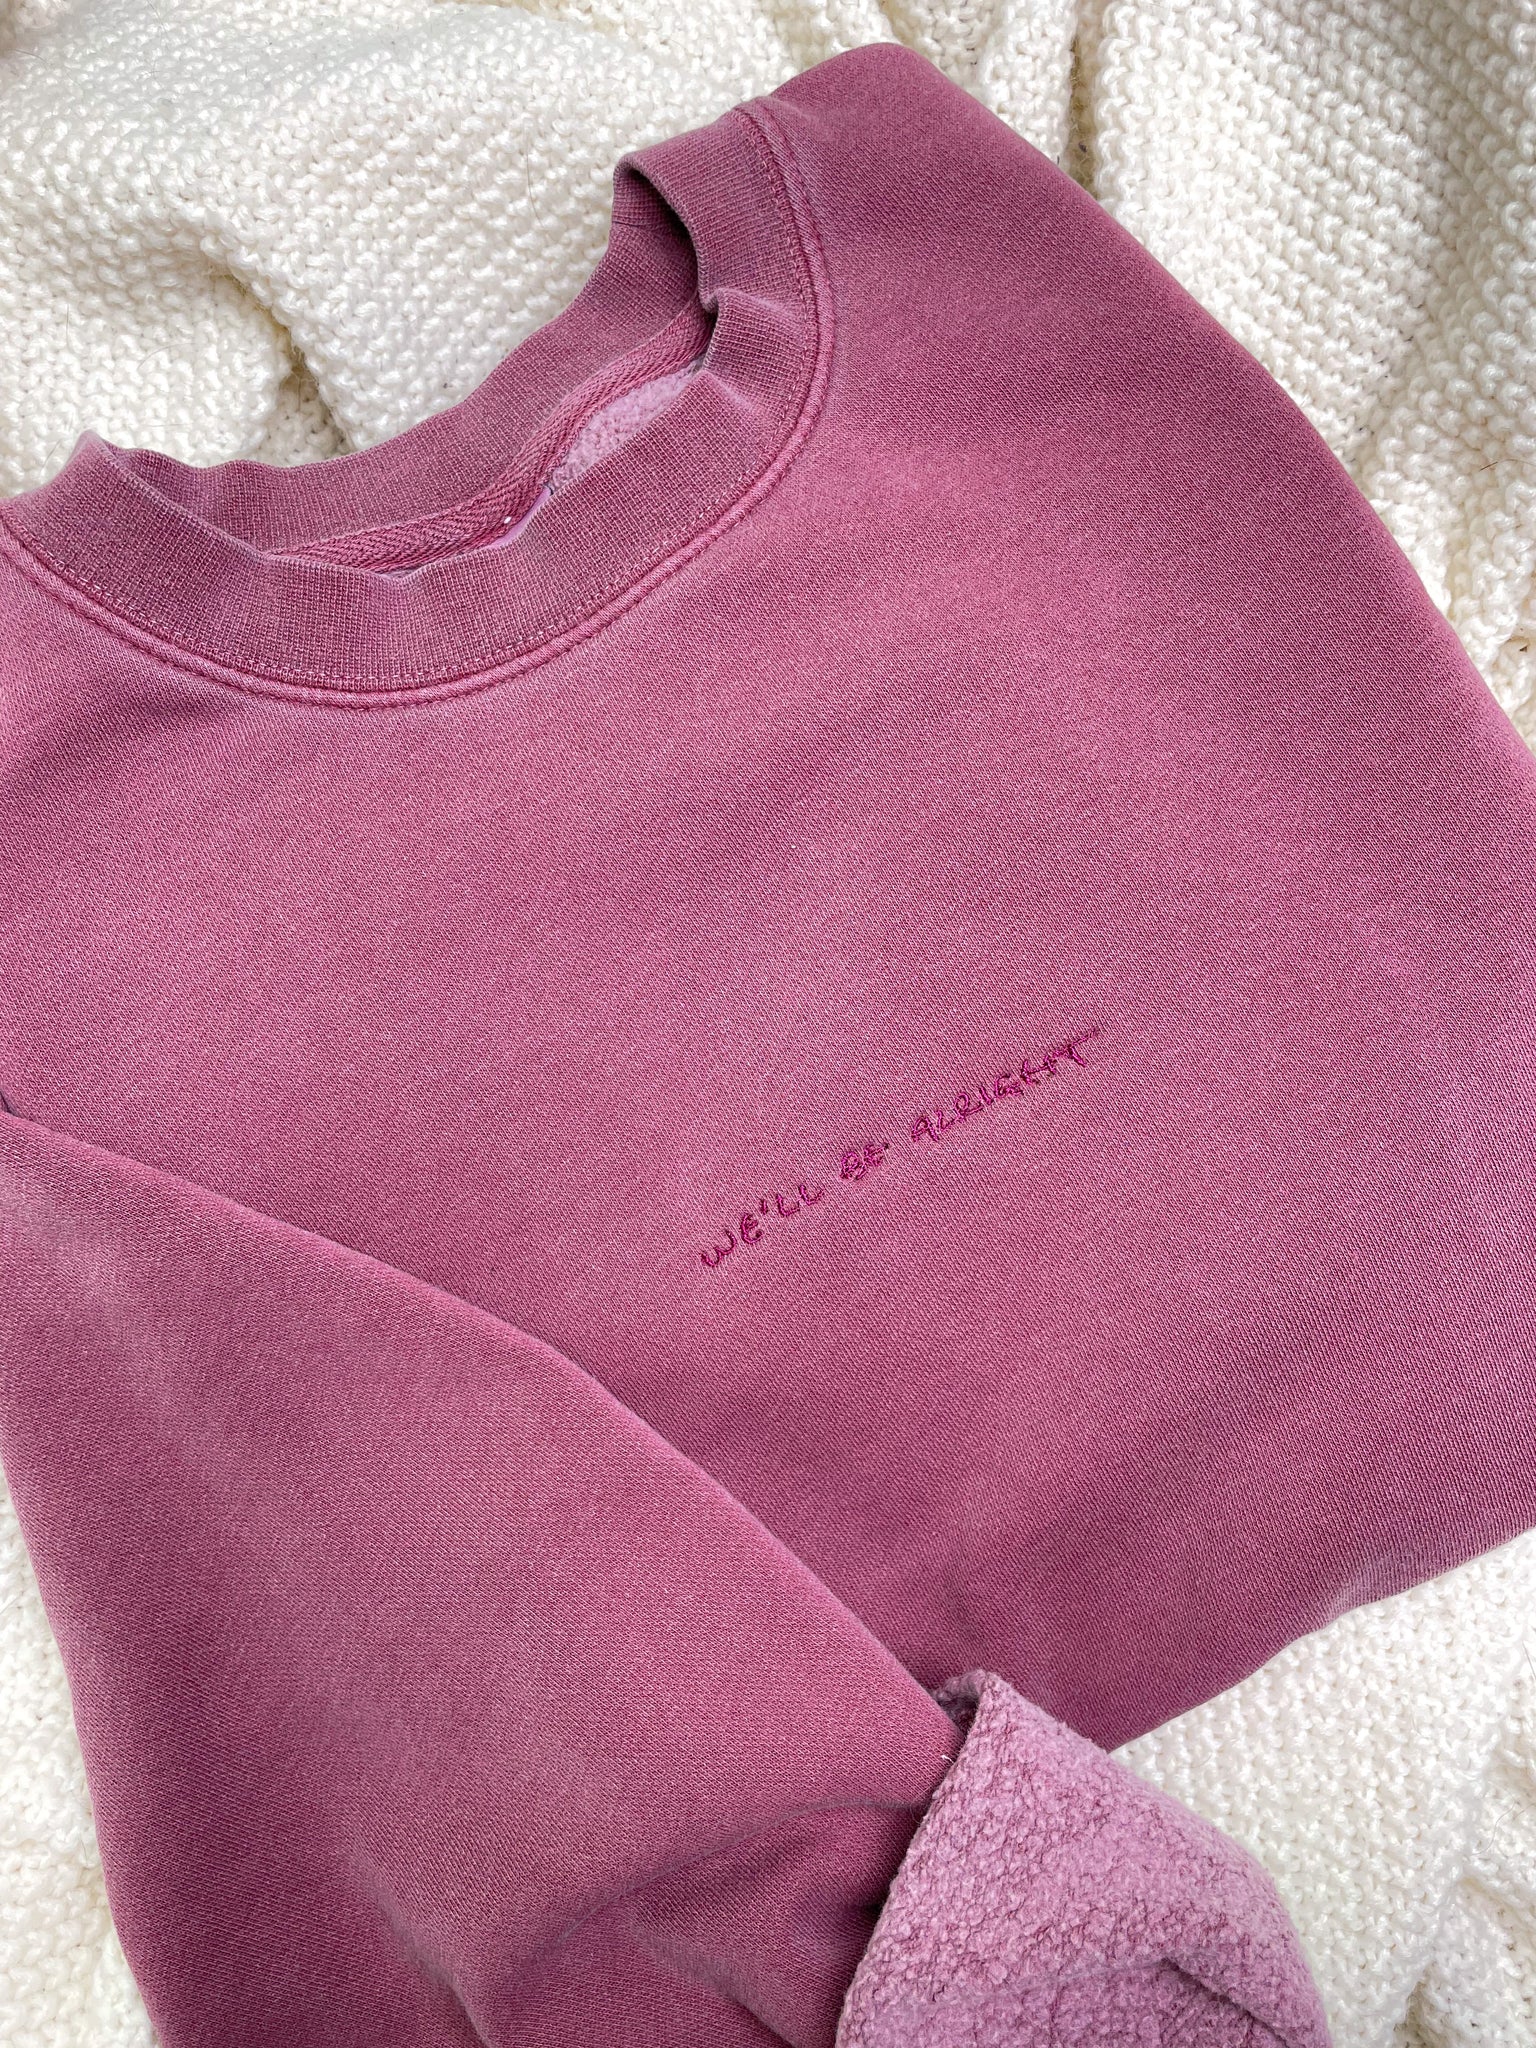 We'll Be Alright Embroidered Sweatshirt